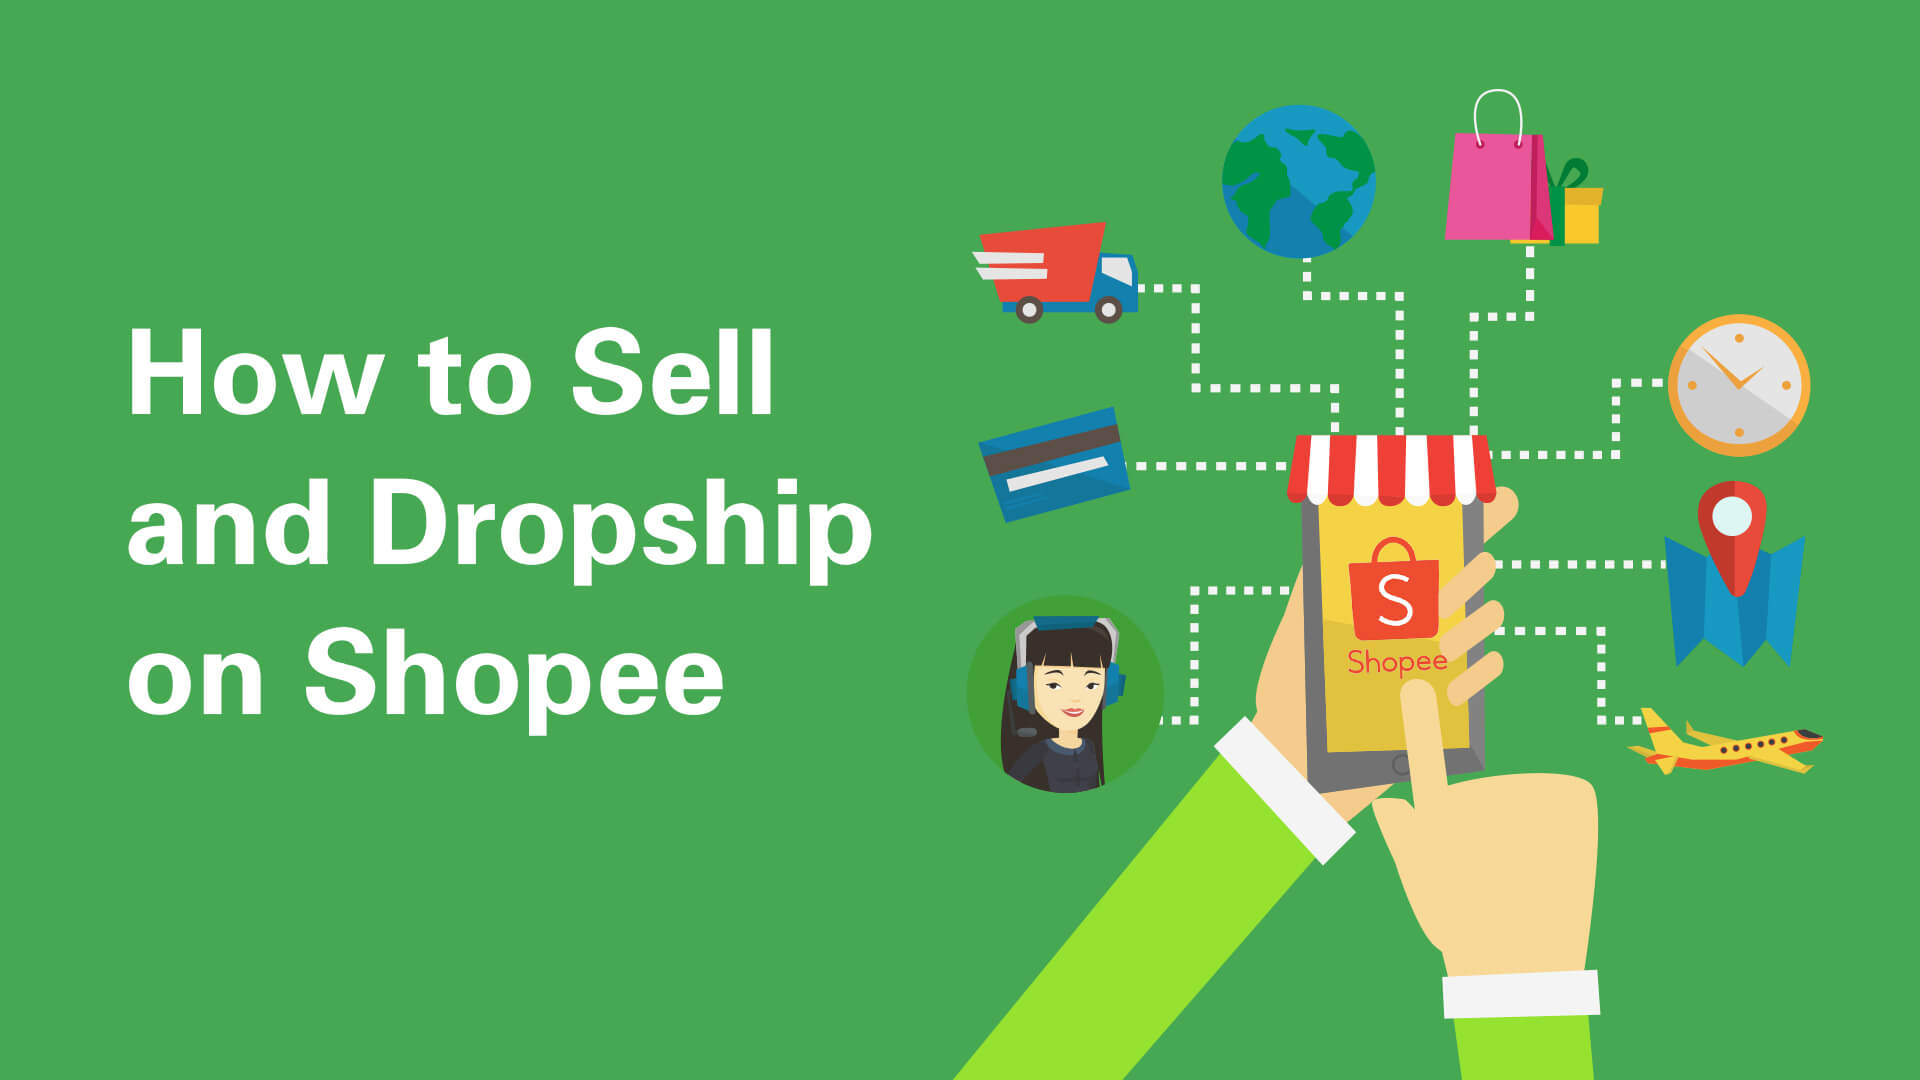 https://bestfulfill.com/wp-content/uploads/2022/01/How-To-Dropship-and-Sell-In-Shopee.jpg